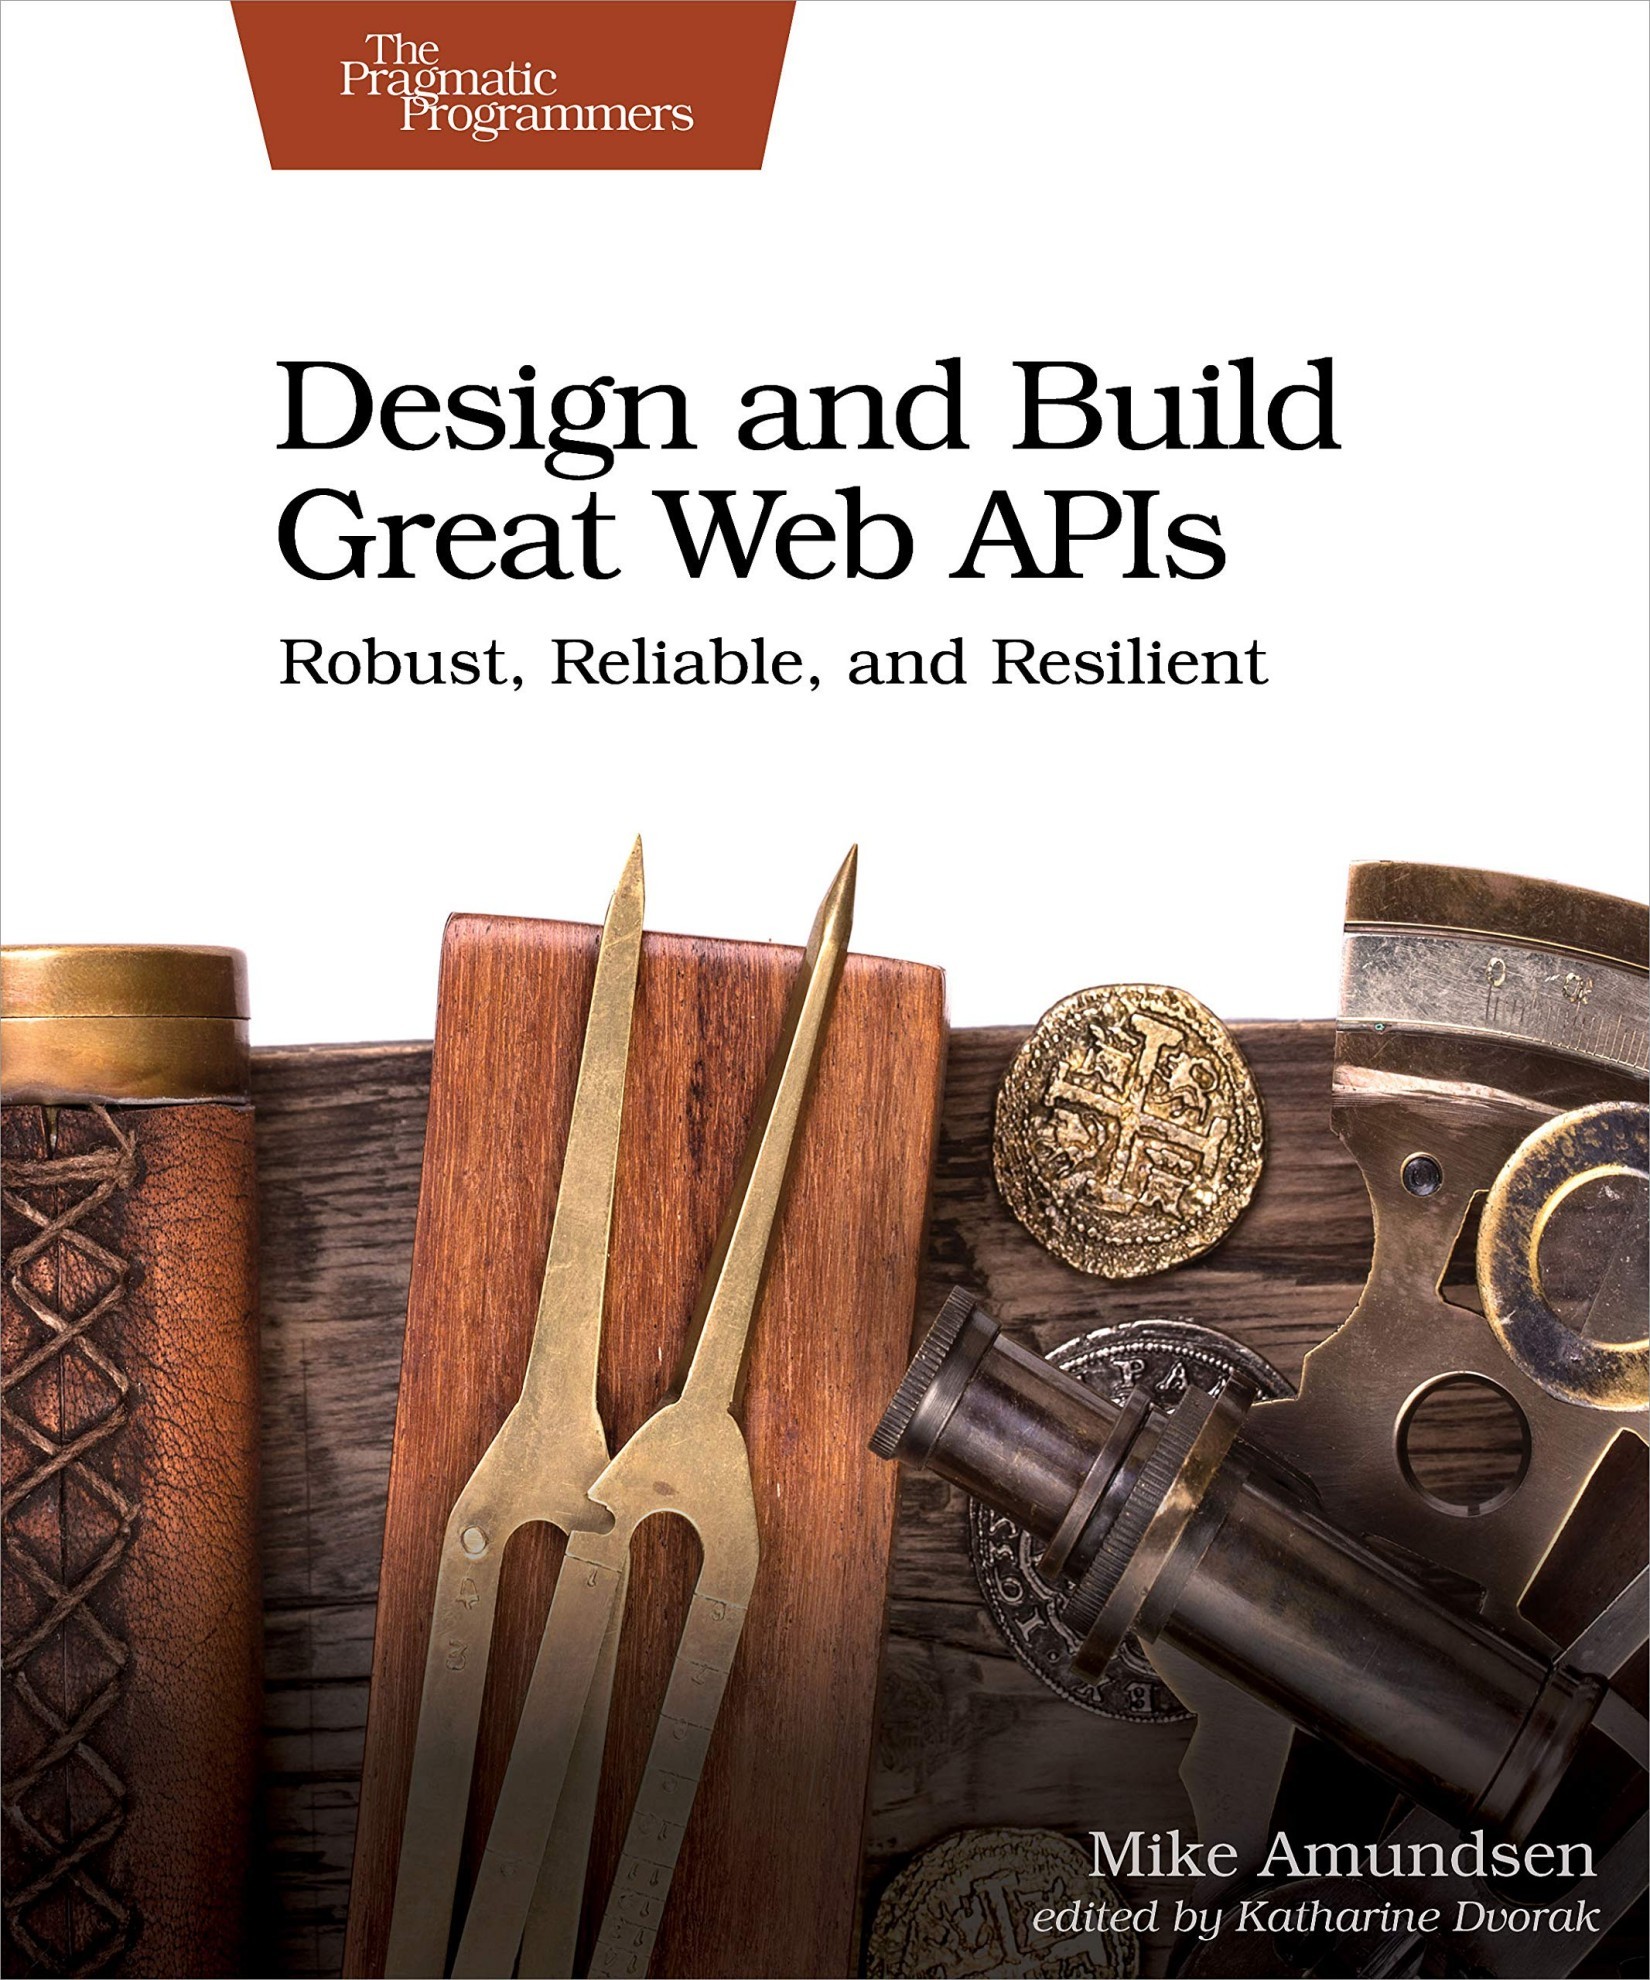 Design and Build Great Web APIs: Robust, Reliable, and Resilient